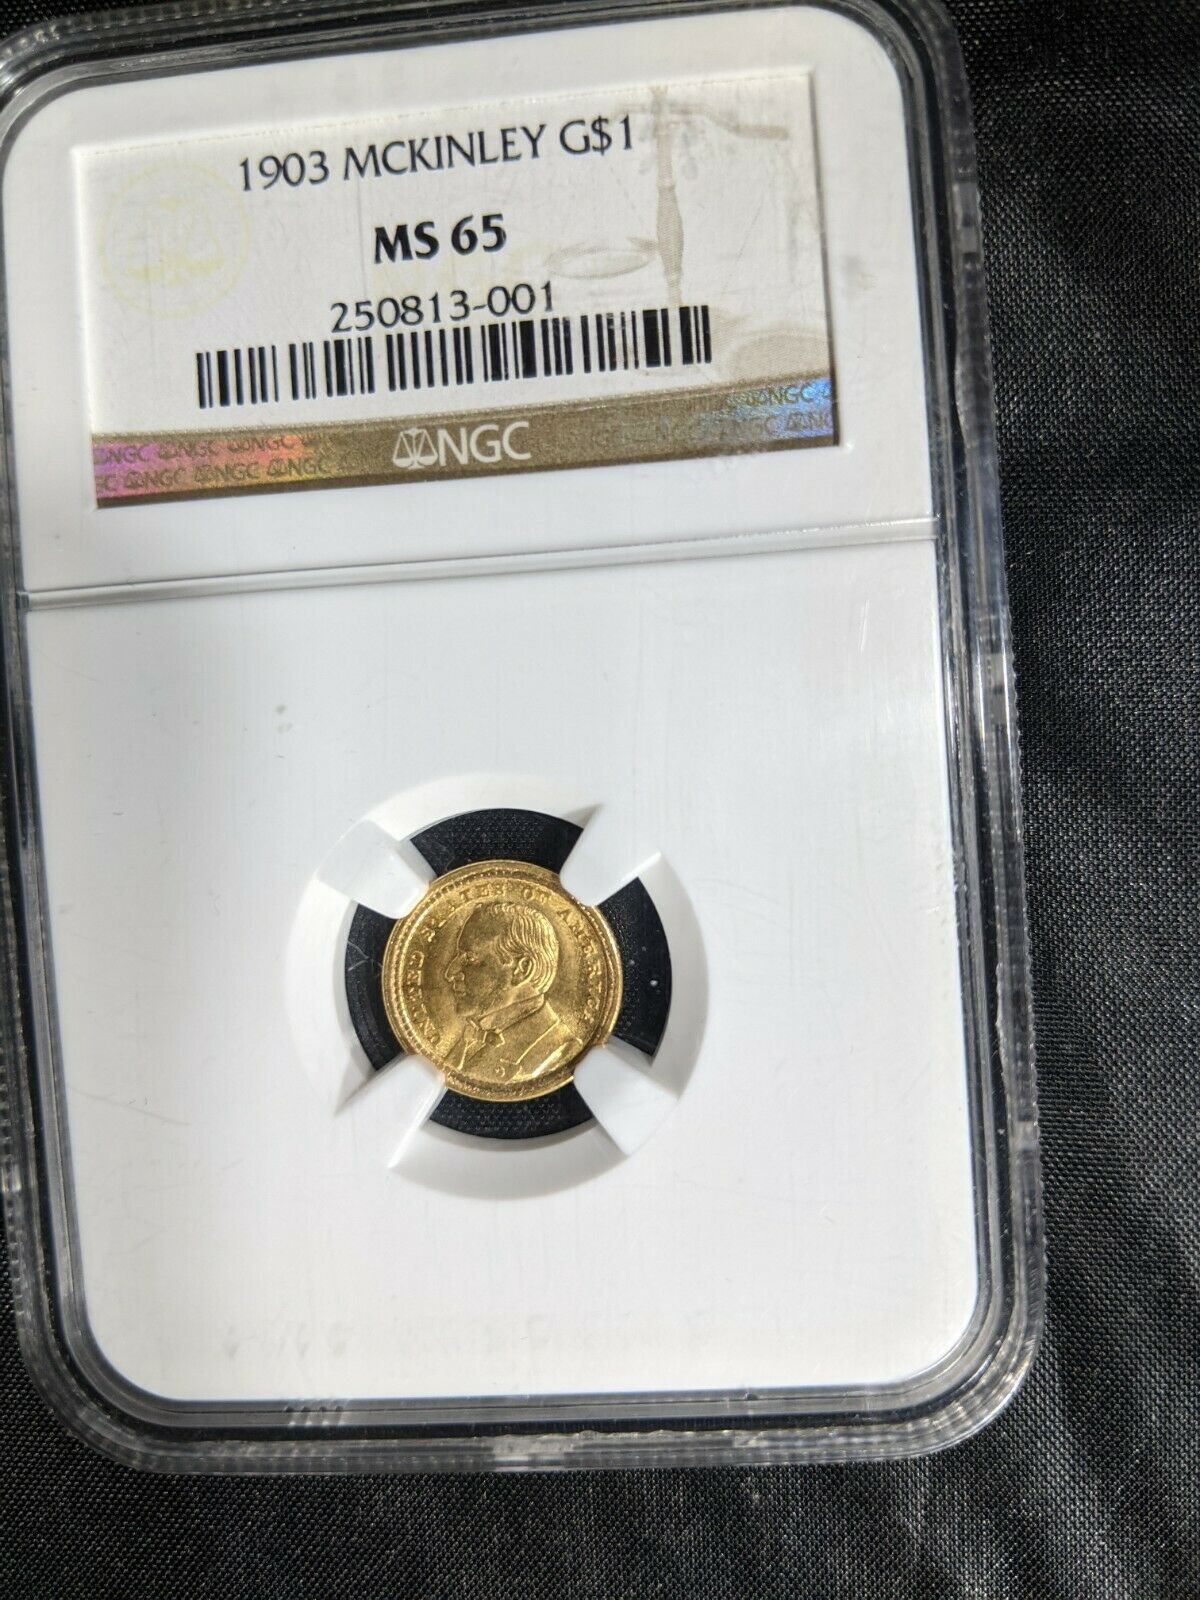 1903 $1 Gold Mckinley Ngc Ms65